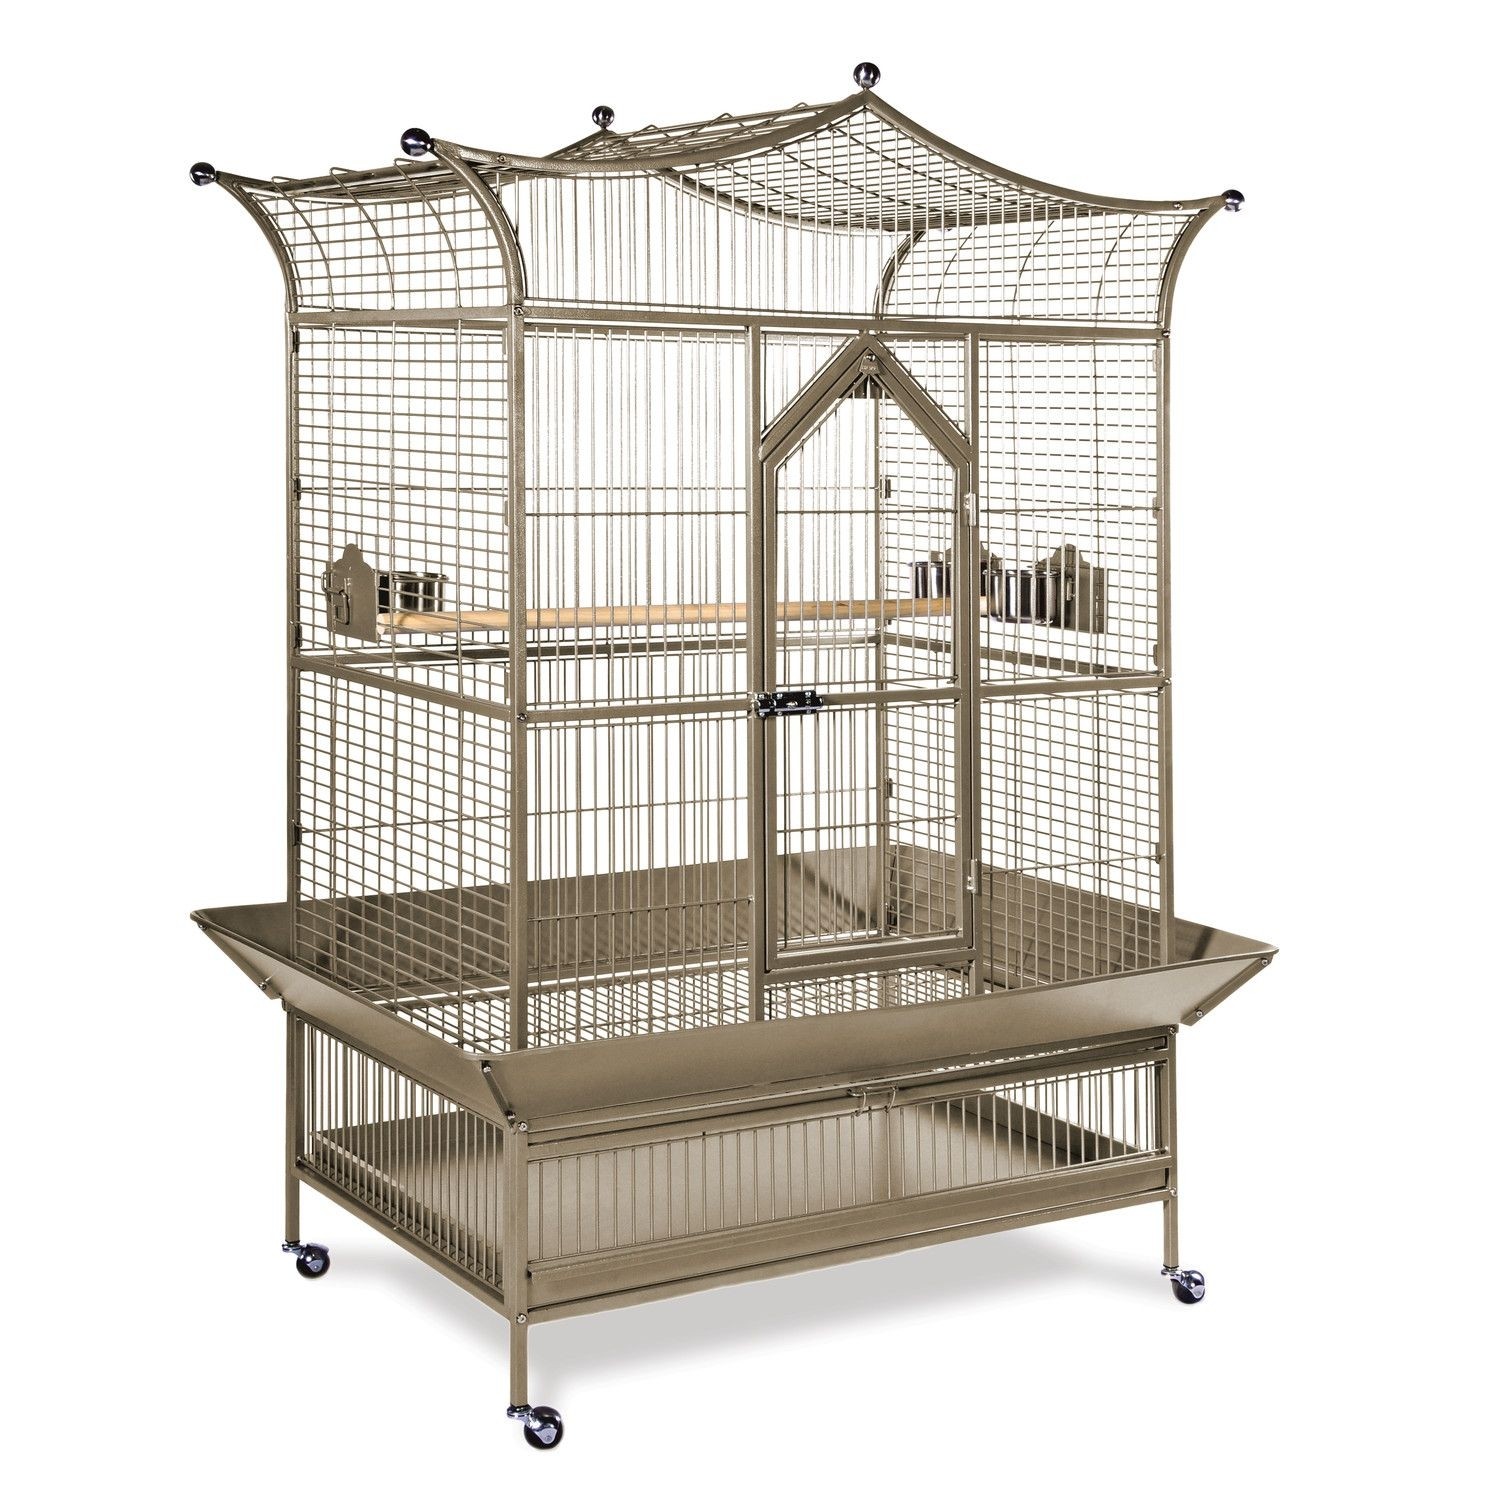 Signature Series Royalty Small Bird Cage